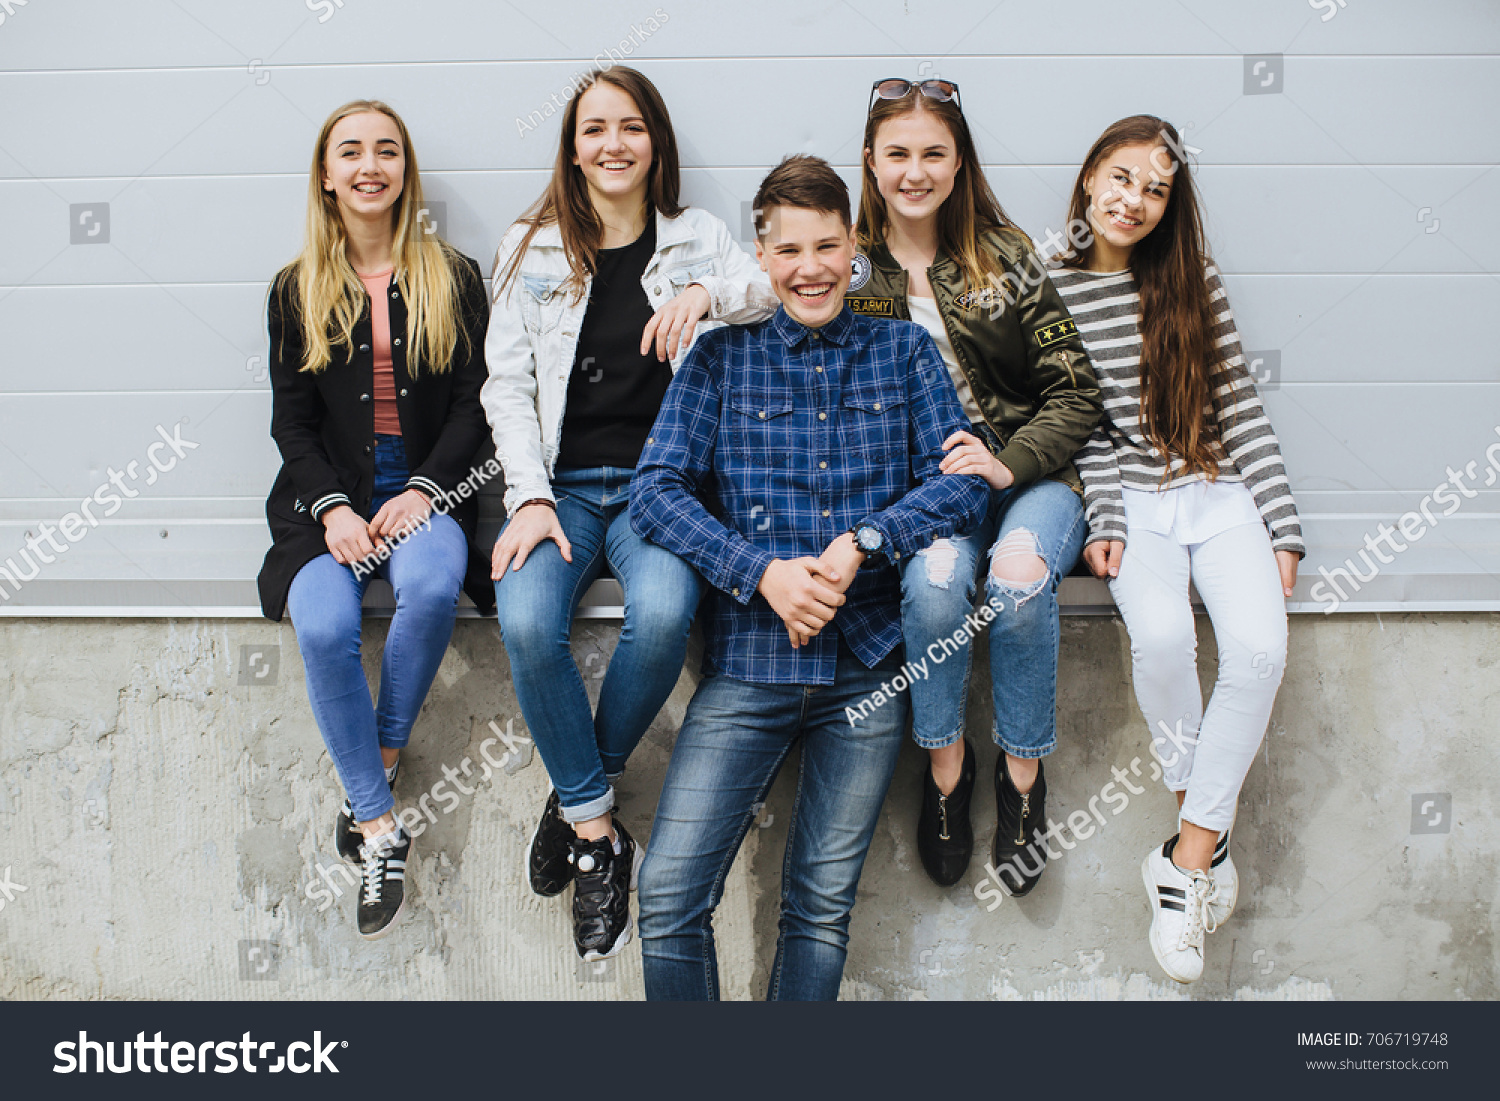 Summer holidays and teenage concept - group of smiling teenagers with skateboard hanging out outside. #706719748